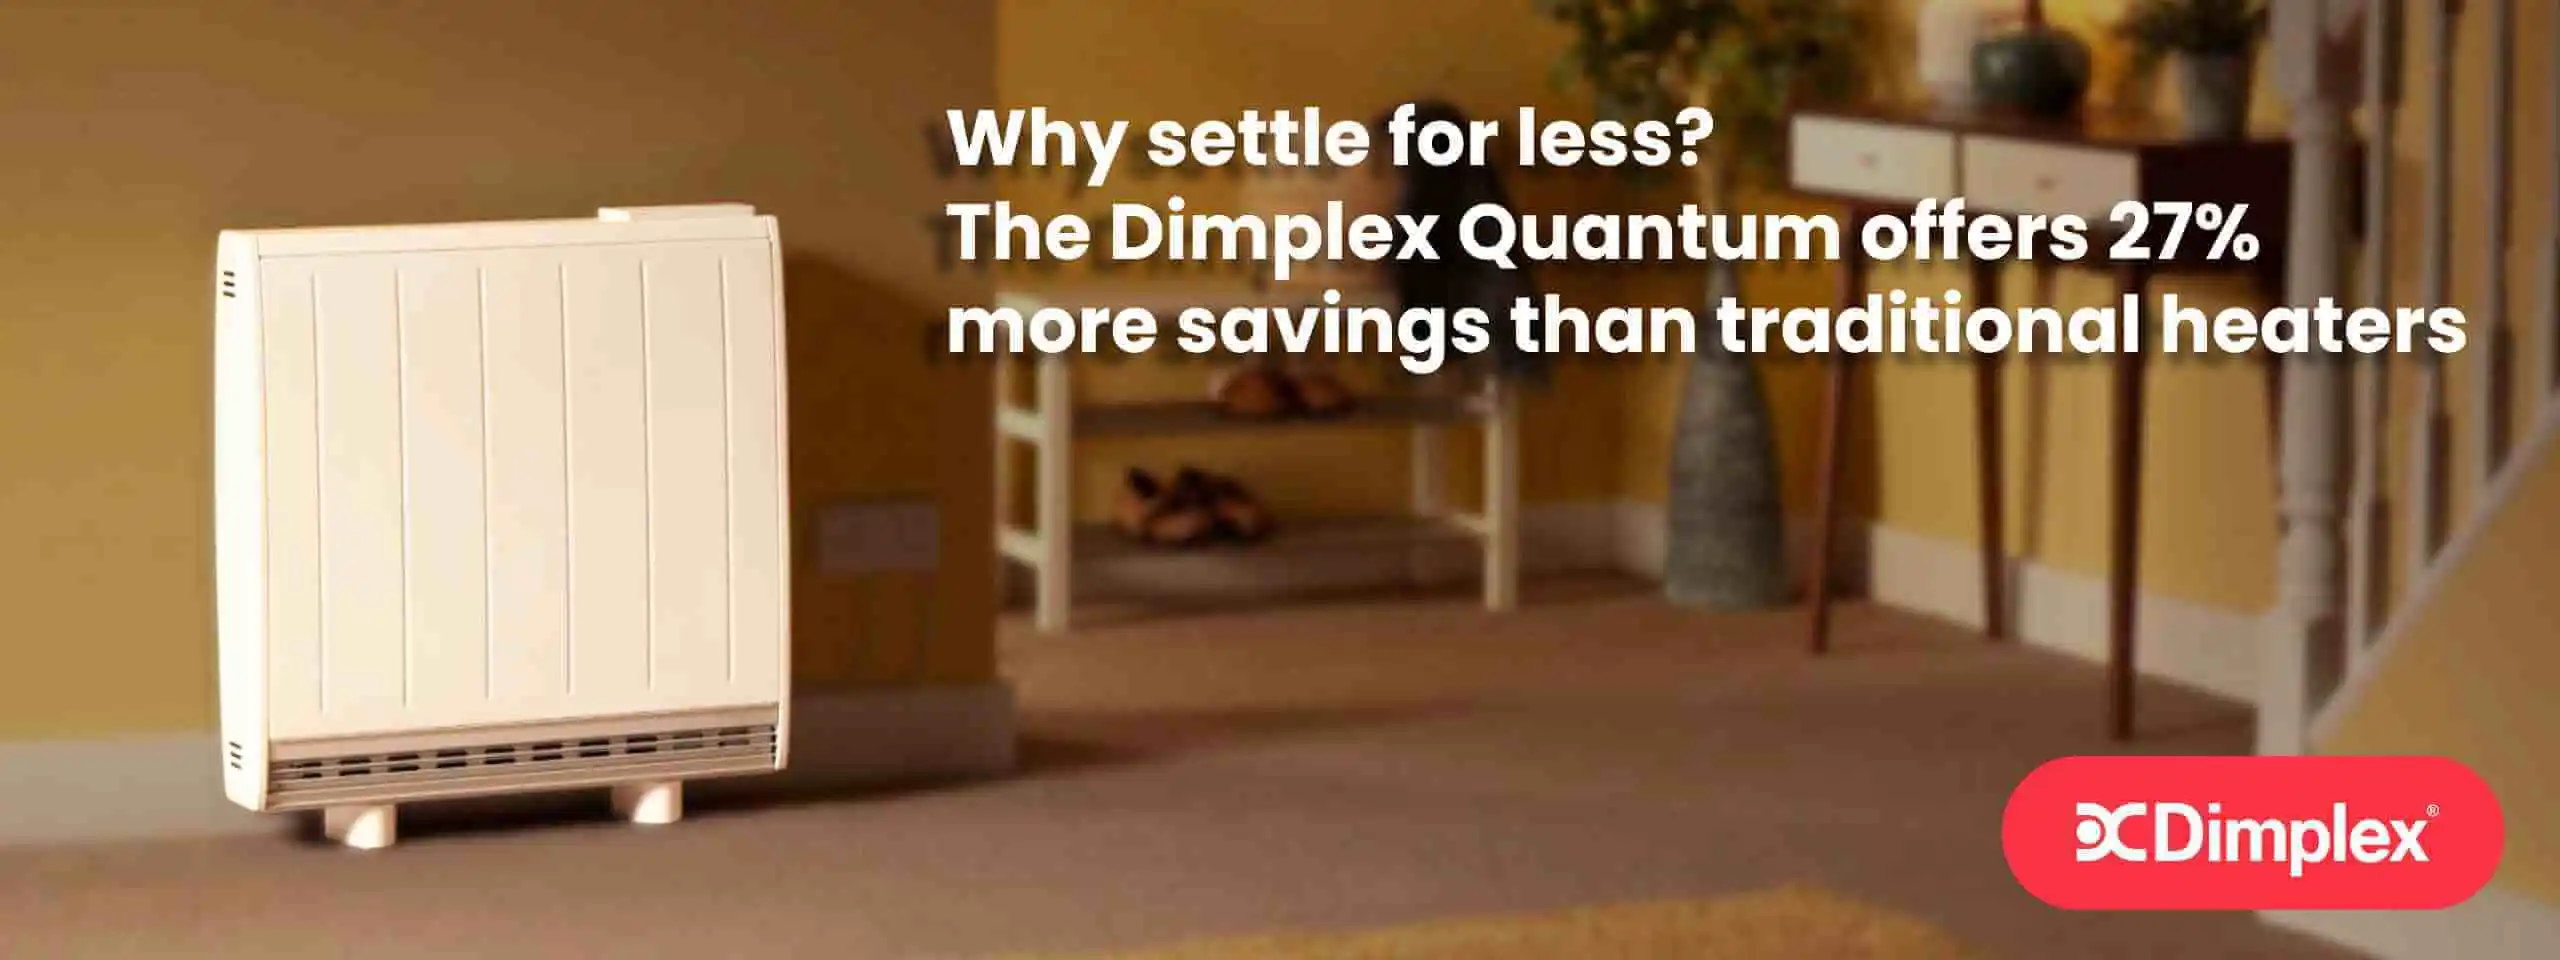 Image showcasing the modern Dimplex Quantum heater with the slogan 'Why settle for less? The Dimplex Quantum offers 27% more savings than traditional heaters.